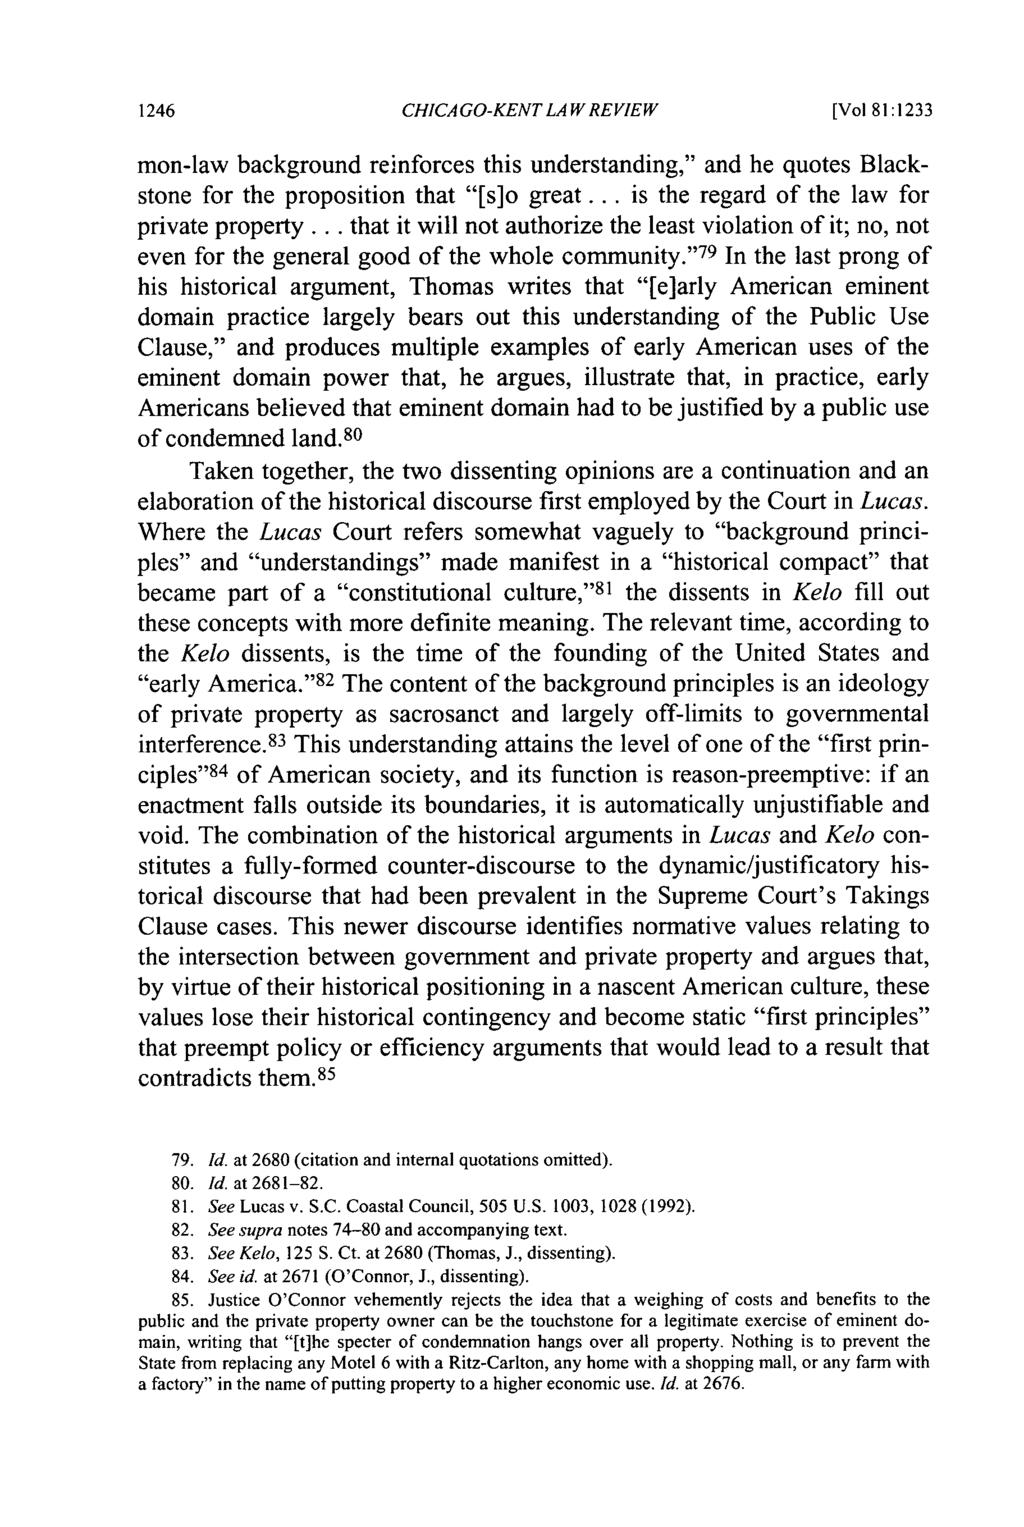 CHICAGO-KENT LAW REVIEW [Vol181:1233 mon-law background reinforces this understanding," and he quotes Blackstone for the proposition that "[s]o great... is the regard of the law for private property.